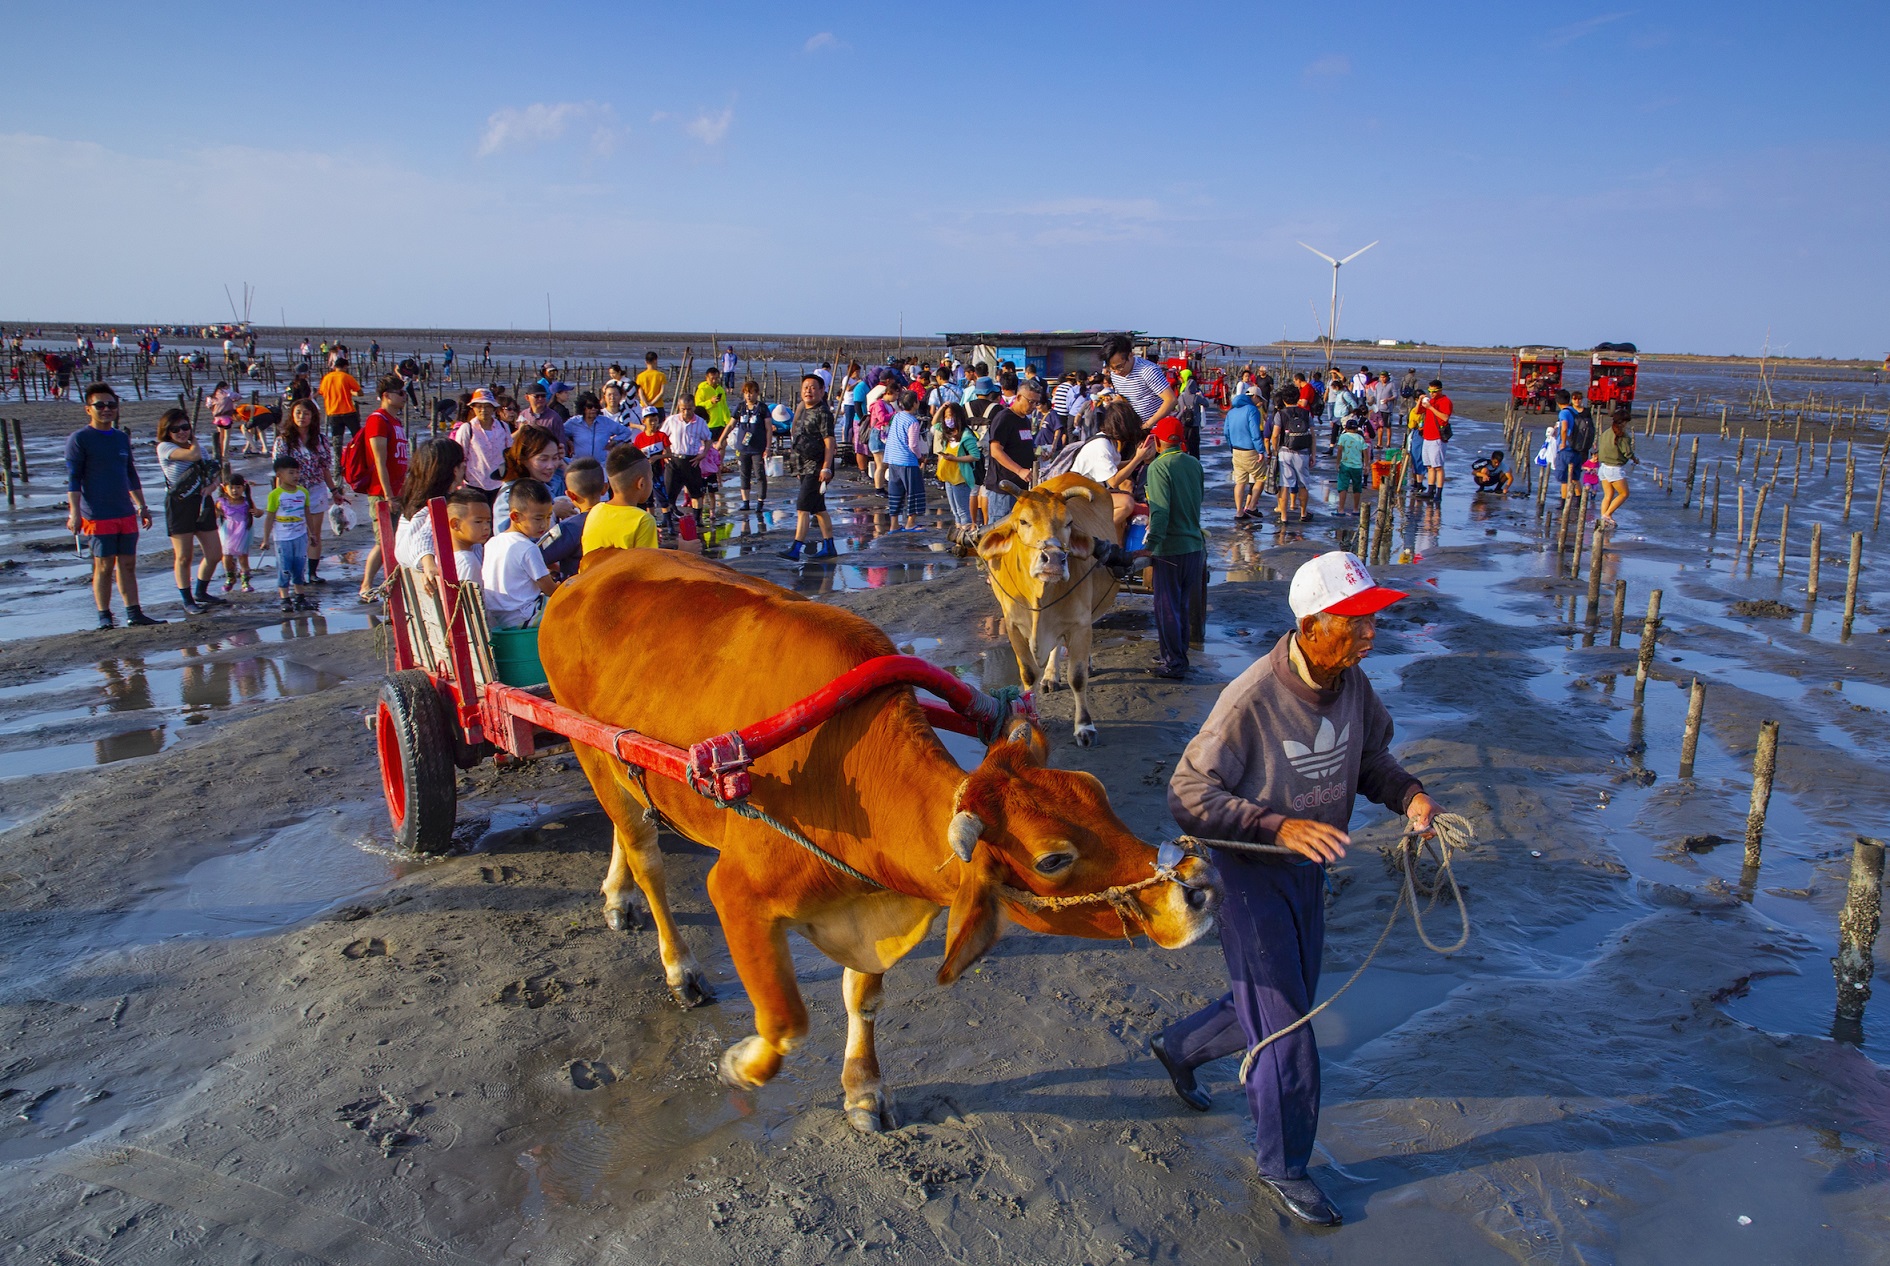 Visitors can enter the intertidal zone by taking the sea-ox drawn carts. As soon as the cart stops, children will run happily to explore this piece of land and adventure. Some of them play with the sa